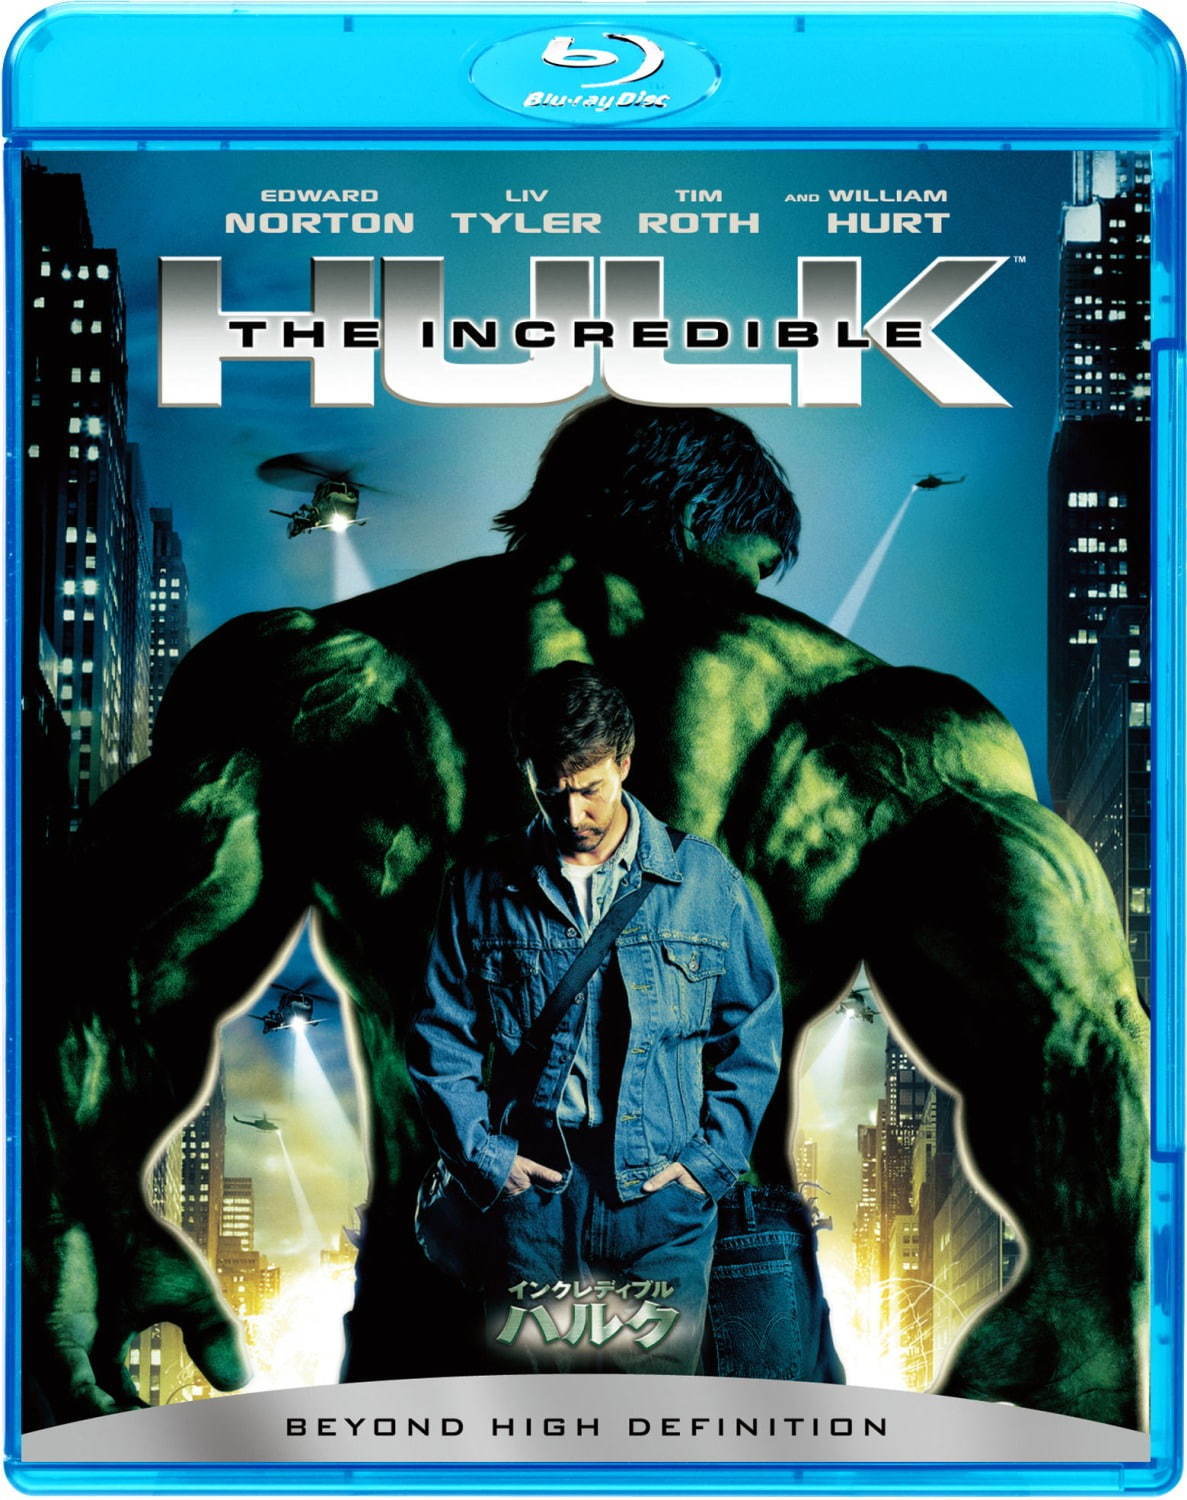 The Incredible Hulk, The Movie (C) 2008 MVL Film Finance LLC. Marvel, The Incredible Hulk, all Character names and their distinctive likenesses: TM &
 (C) 2008 Marvel Entertainment, Inc. and its subsidiaries. All Rights Reserved. Super Hero is a co-owned registered trademark.